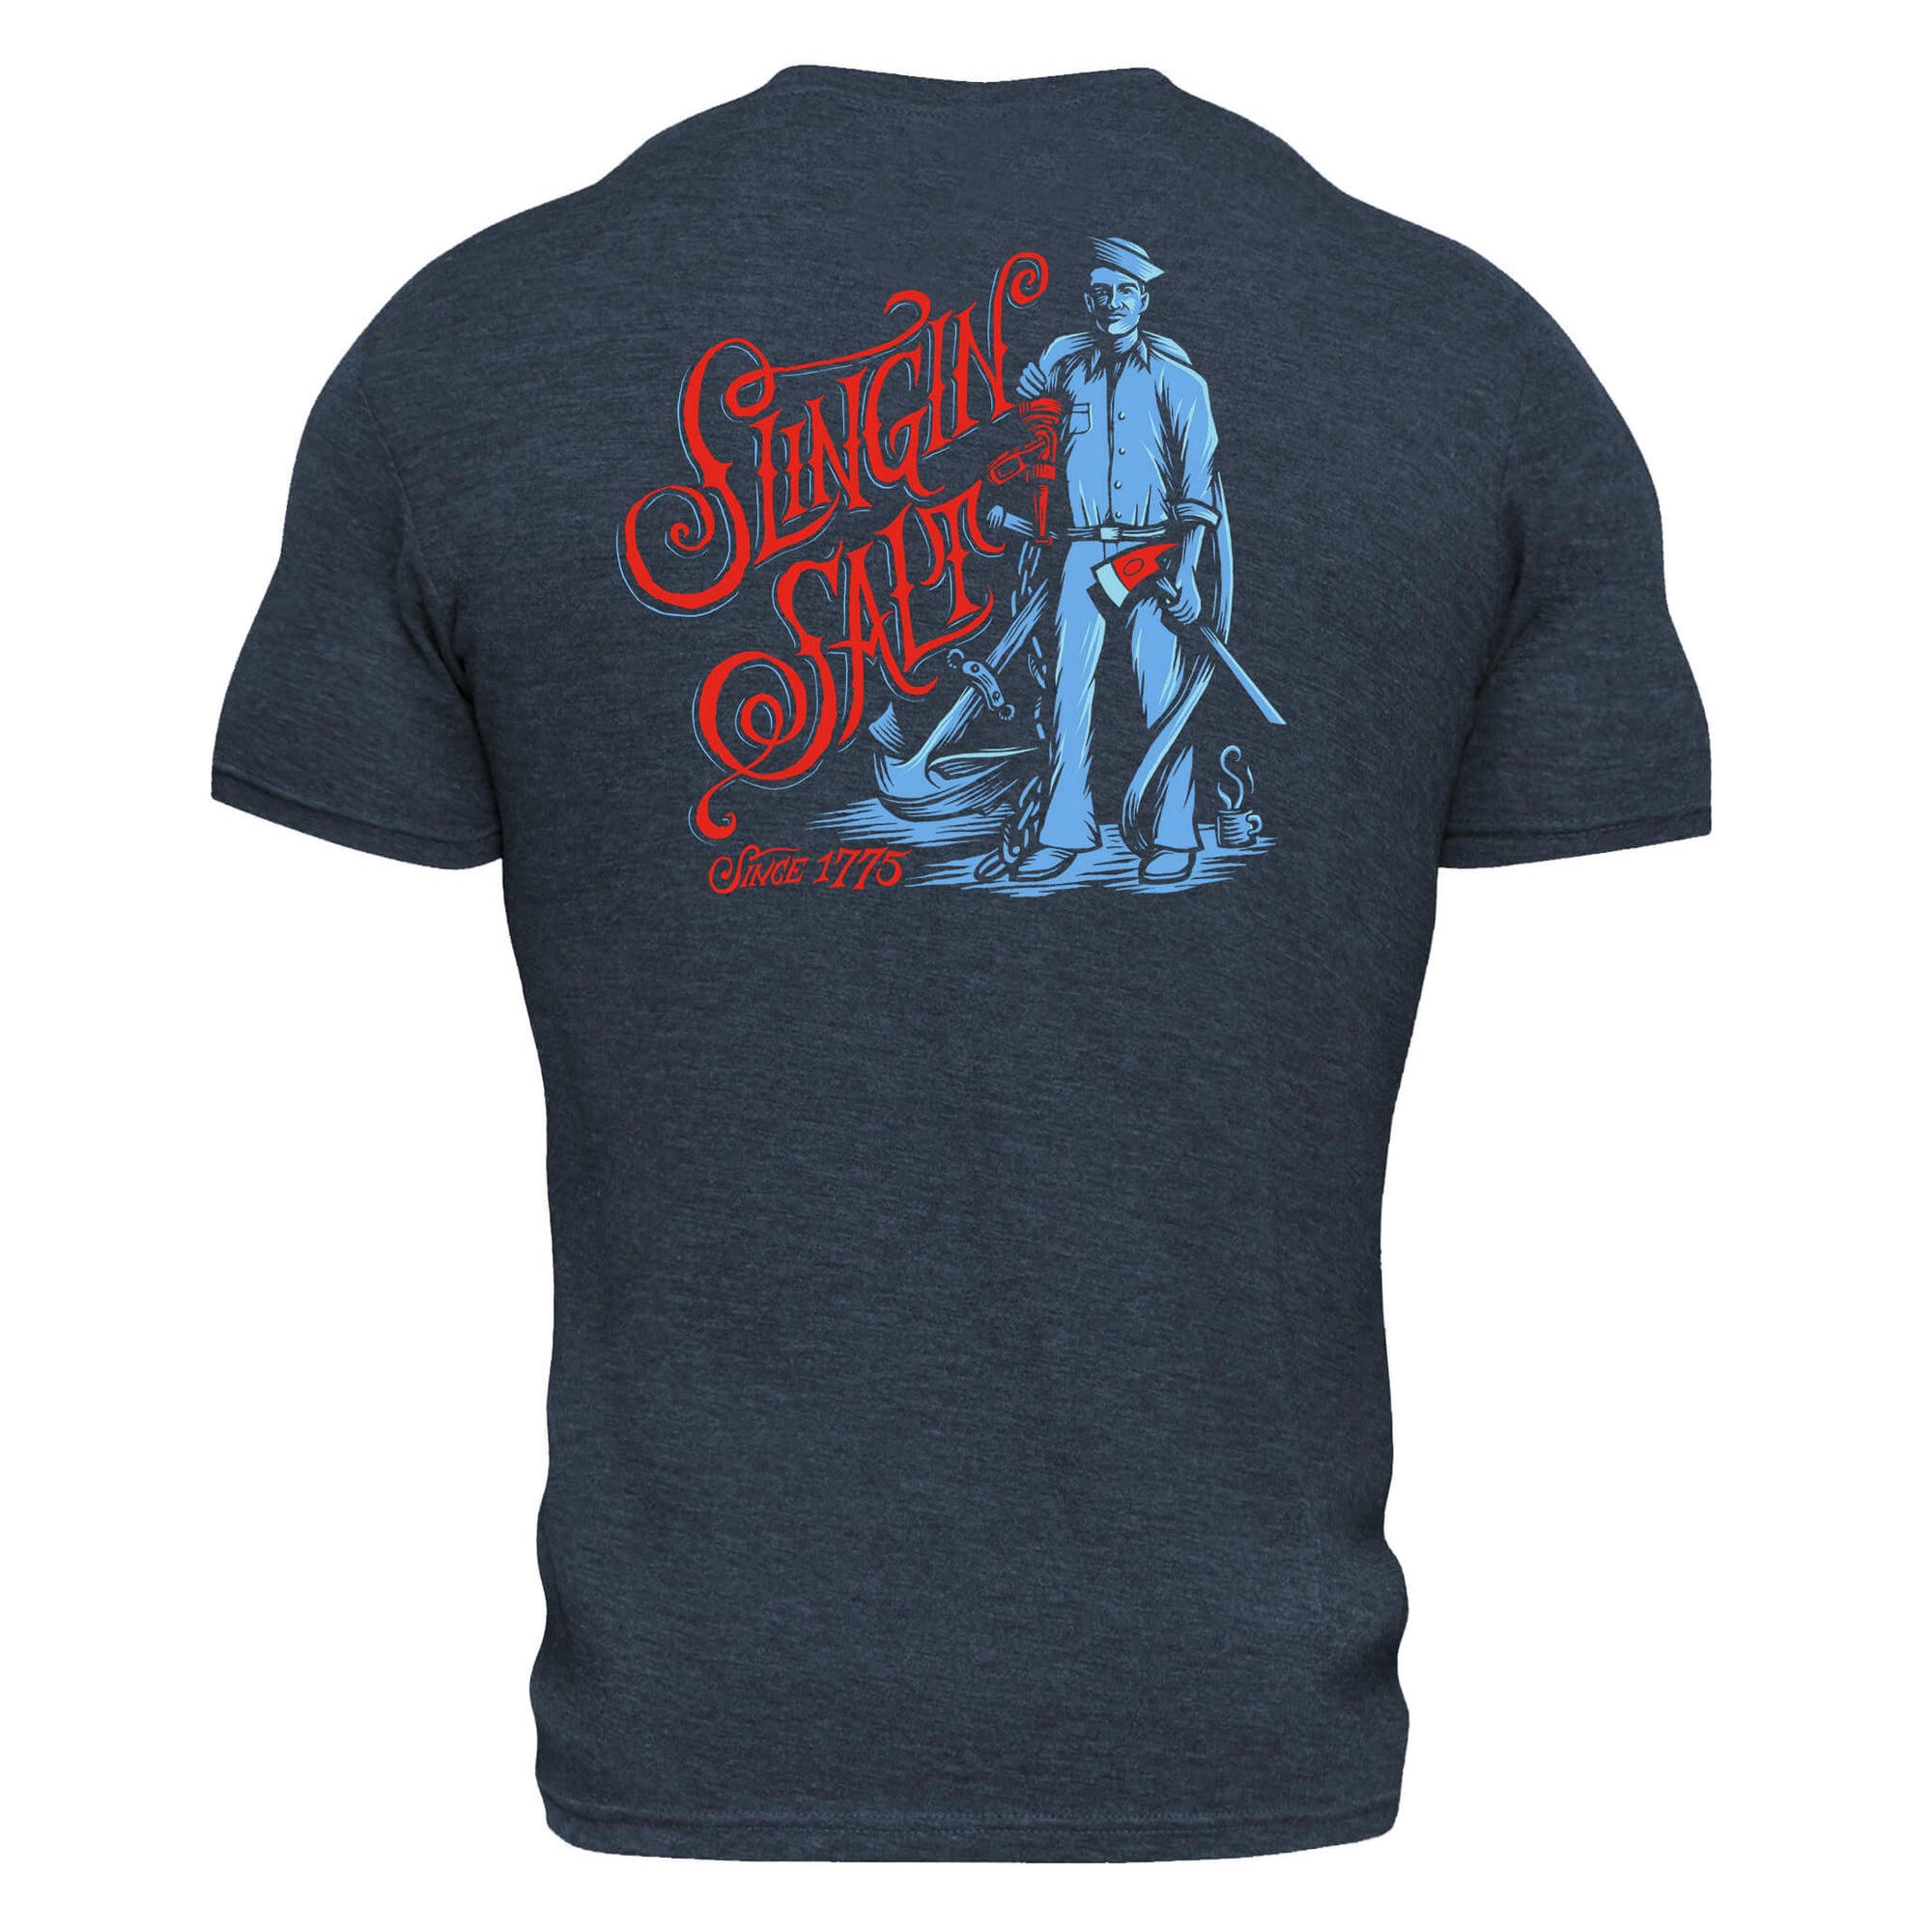 The back of a grey shirt. There is red text that reads "Slingin Salt since 1775" with a graphic of a sailor standing next to it.